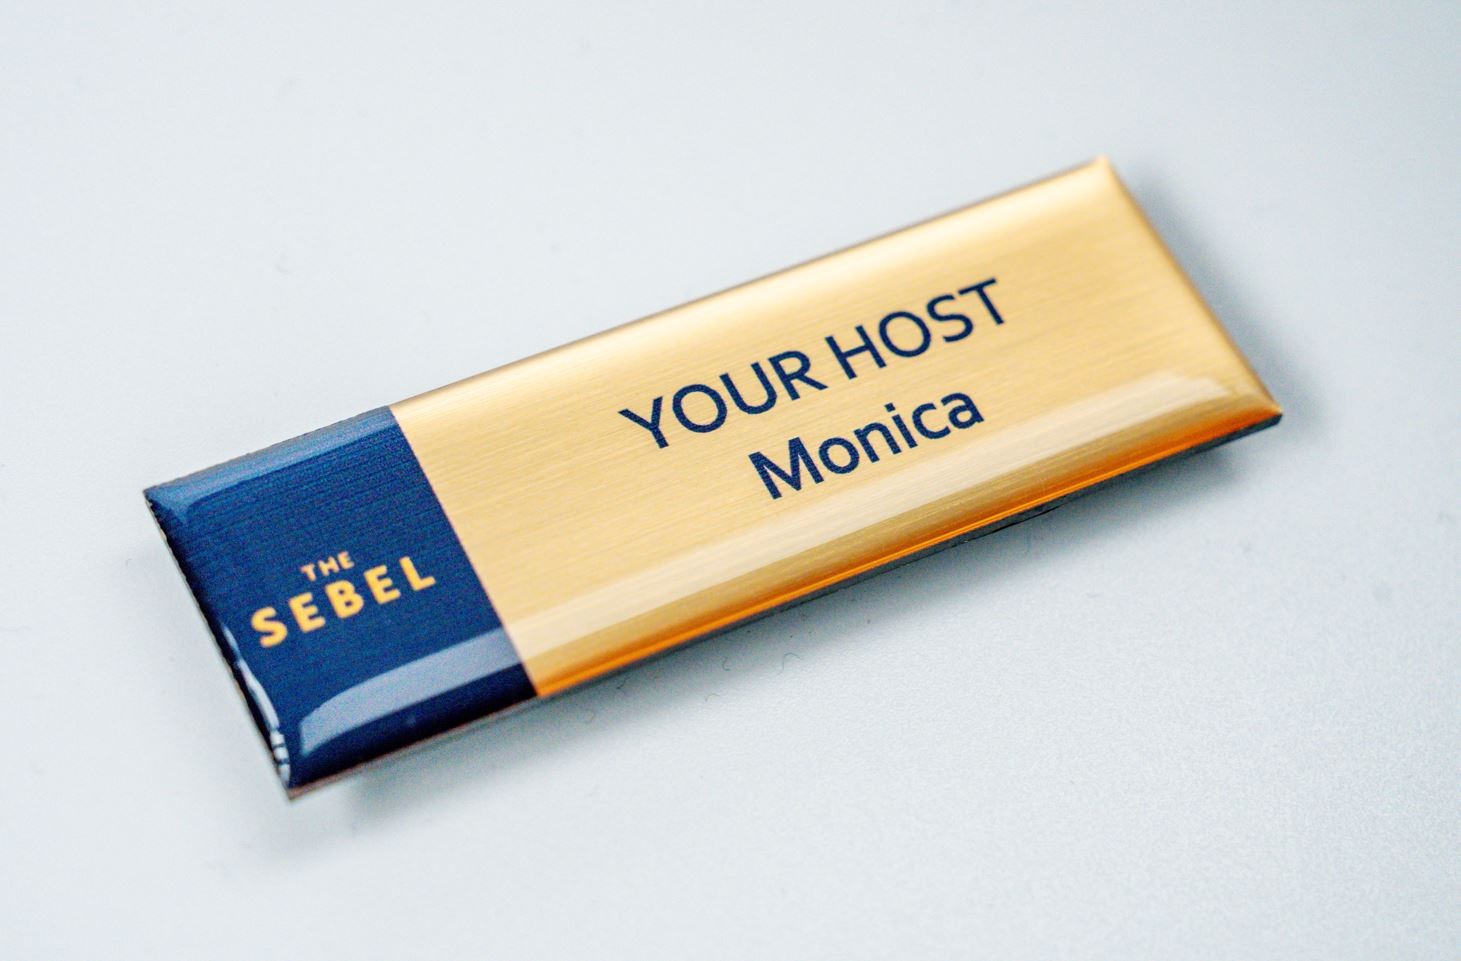 Gold Acrylic name badge with resin coating